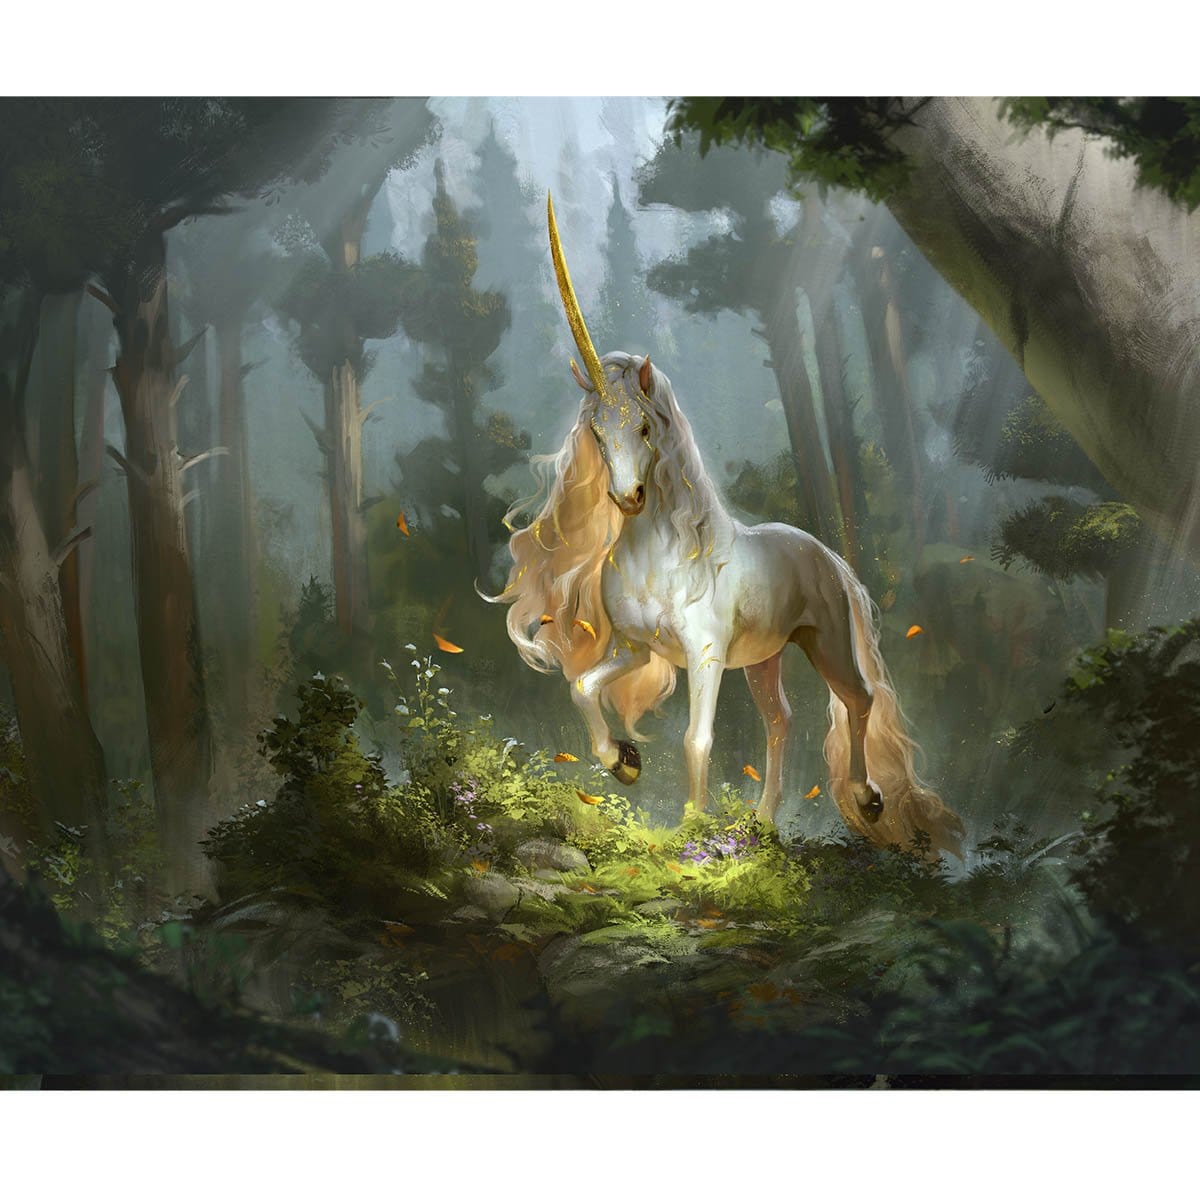 Prized Unicorn Print - Print - Original Magic Art - Accessories for Magic the Gathering and other card games